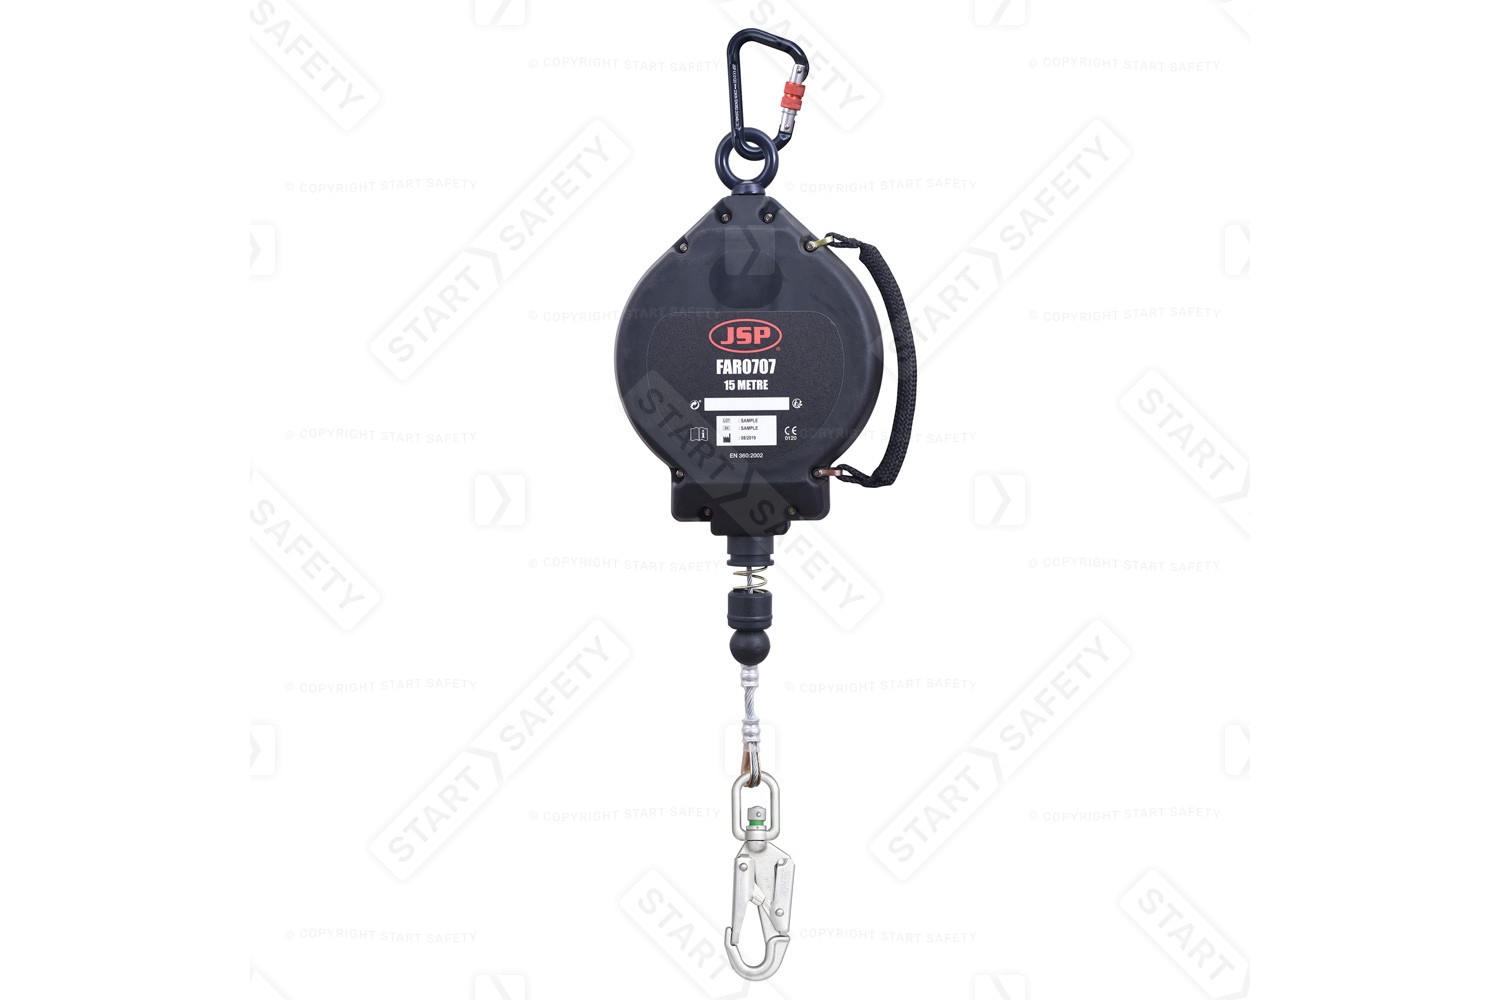 15m Self-Retractable Wire Lifeline FAR0707 From JSP Safety